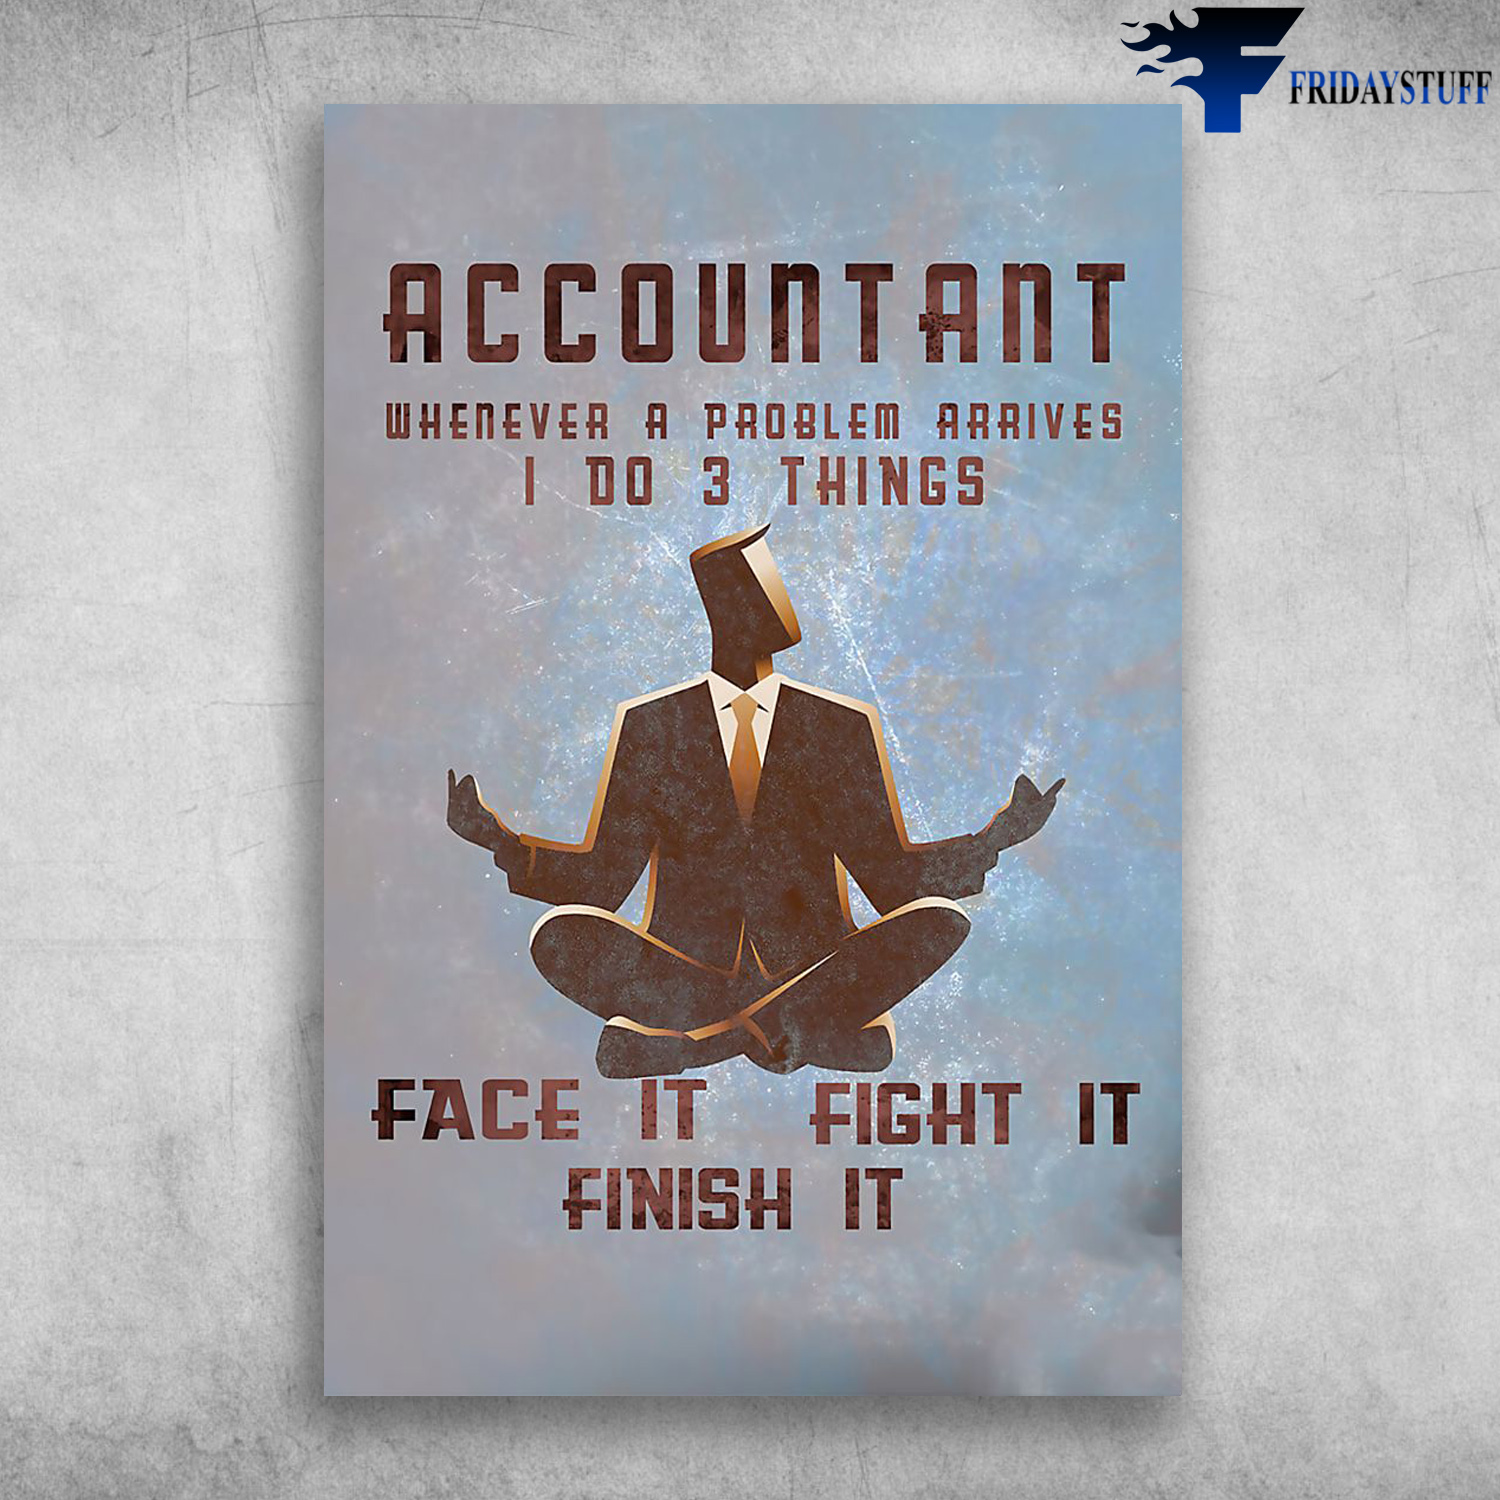 Accountant - Whenever A Problem Arrives, I Do 3 Things, Face It, Fight It, Finish It